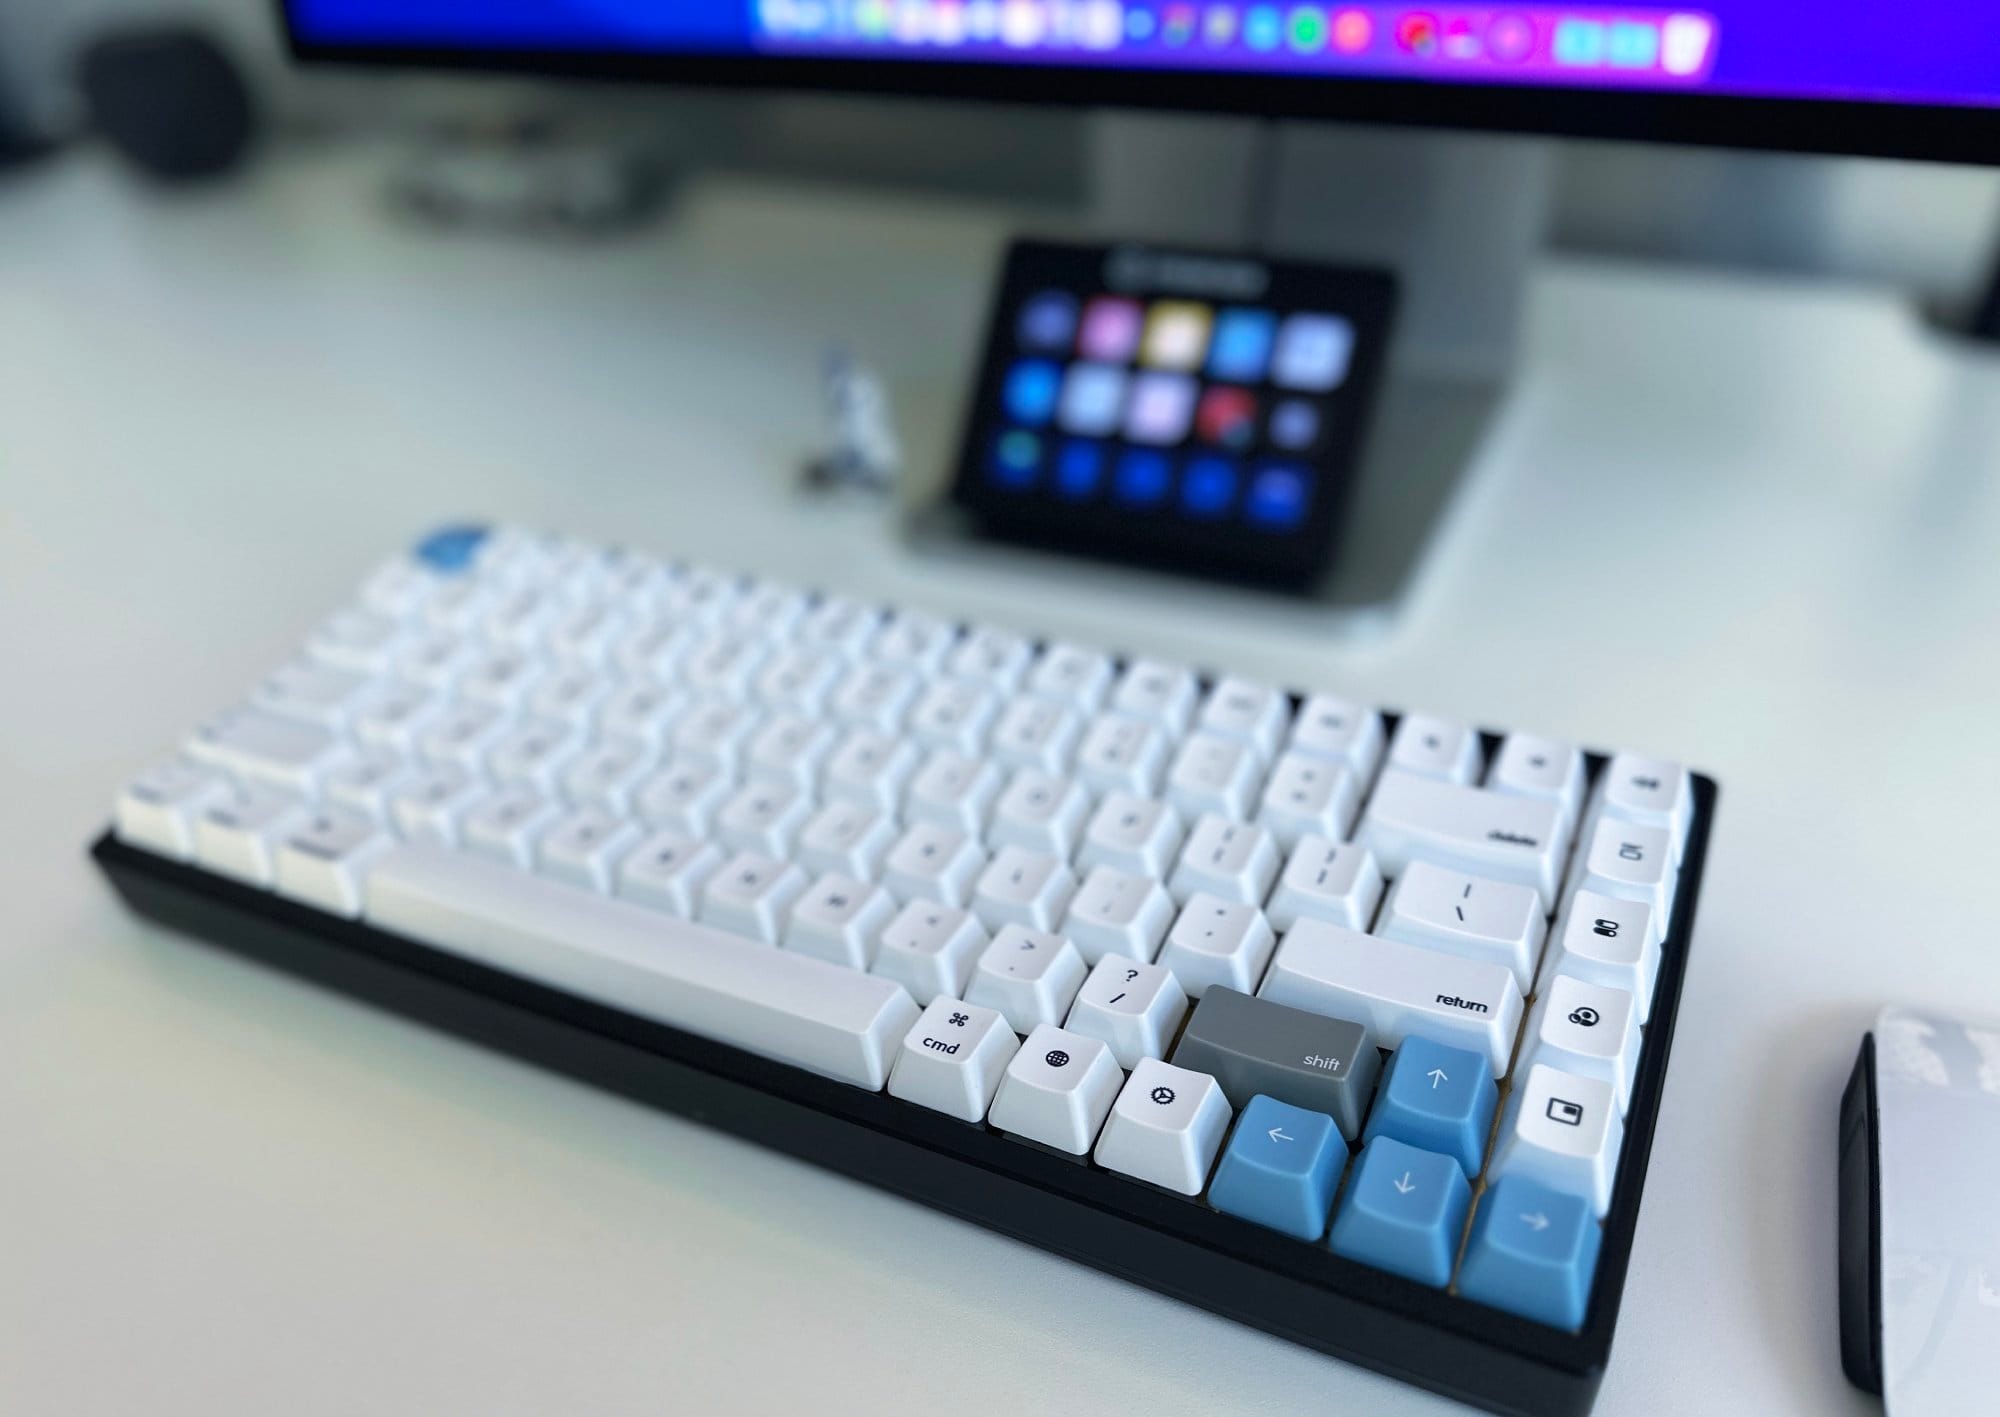 A close-up of a mechanical keyboard on a desk, with blurred background elements including a mouse, a tablet on a stand, and part of a monitor